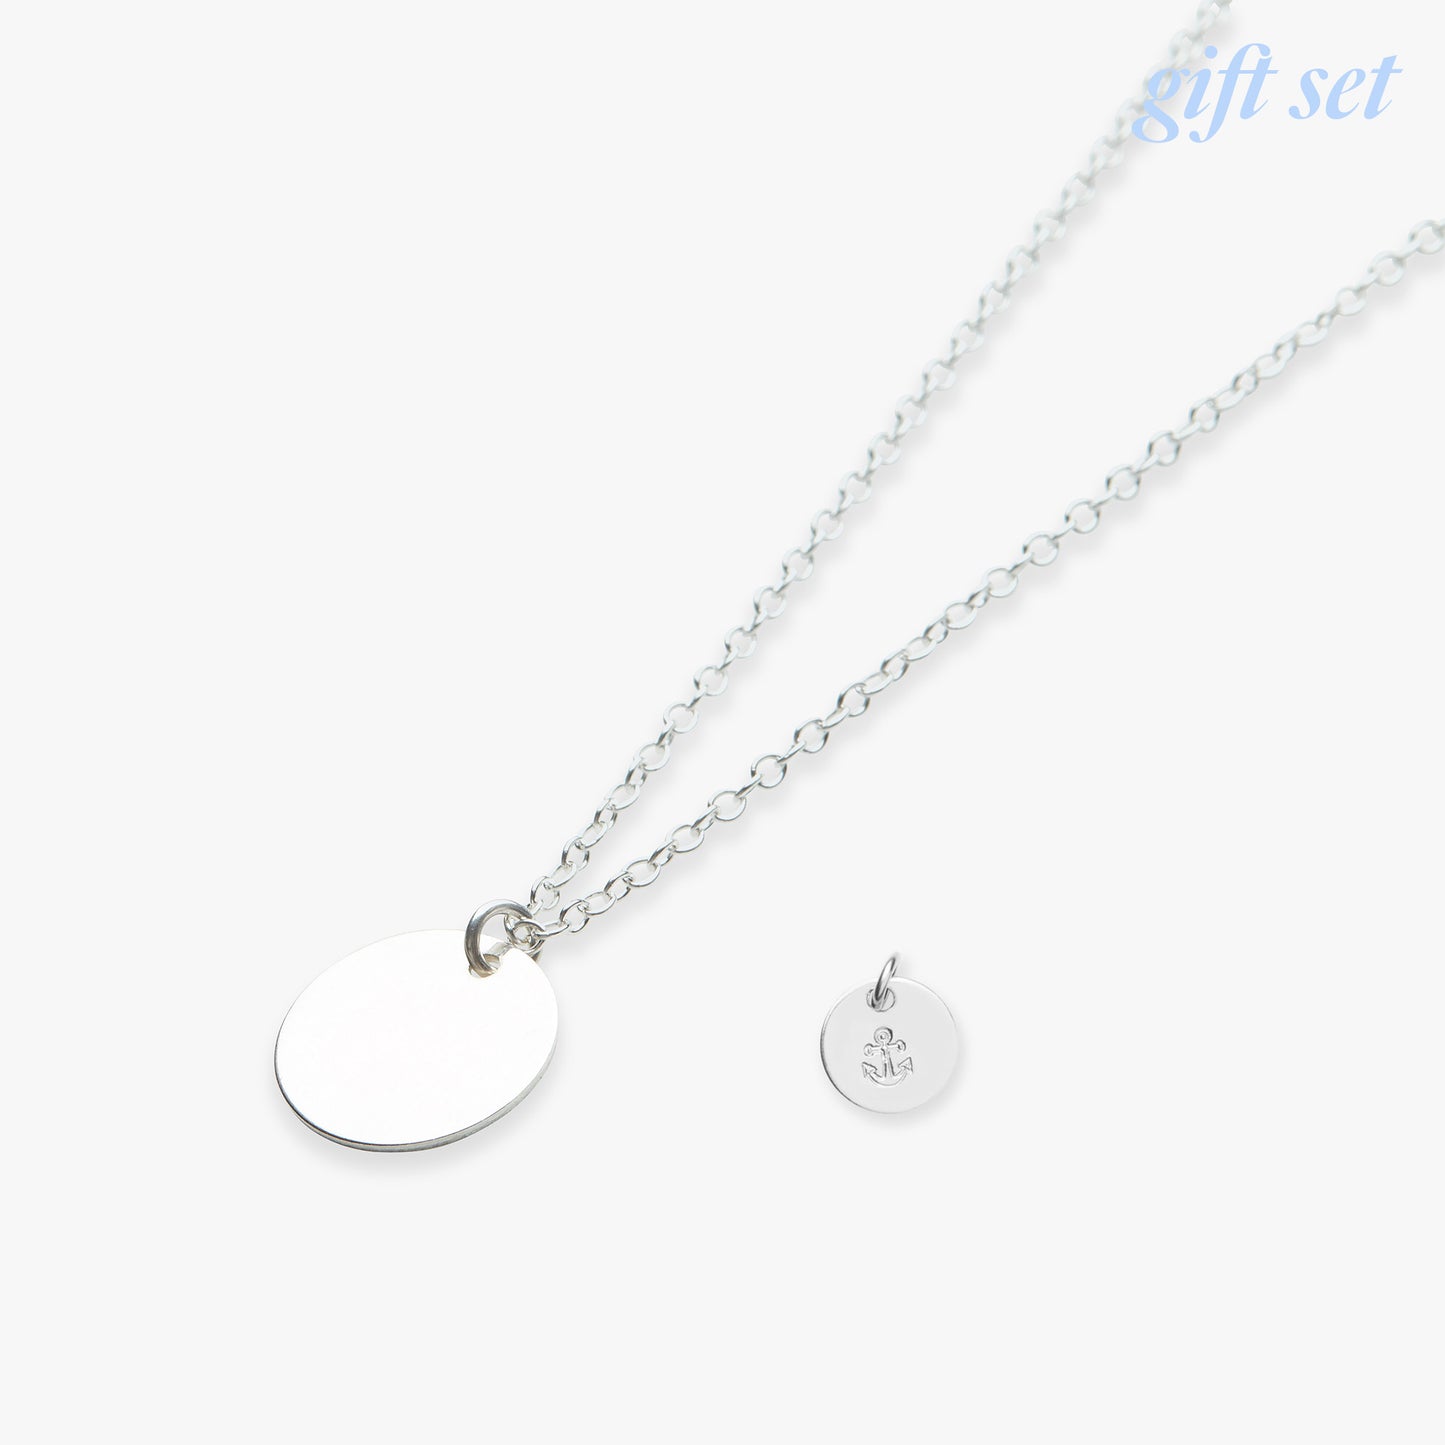 Mother's Day personalised necklace gift set silver